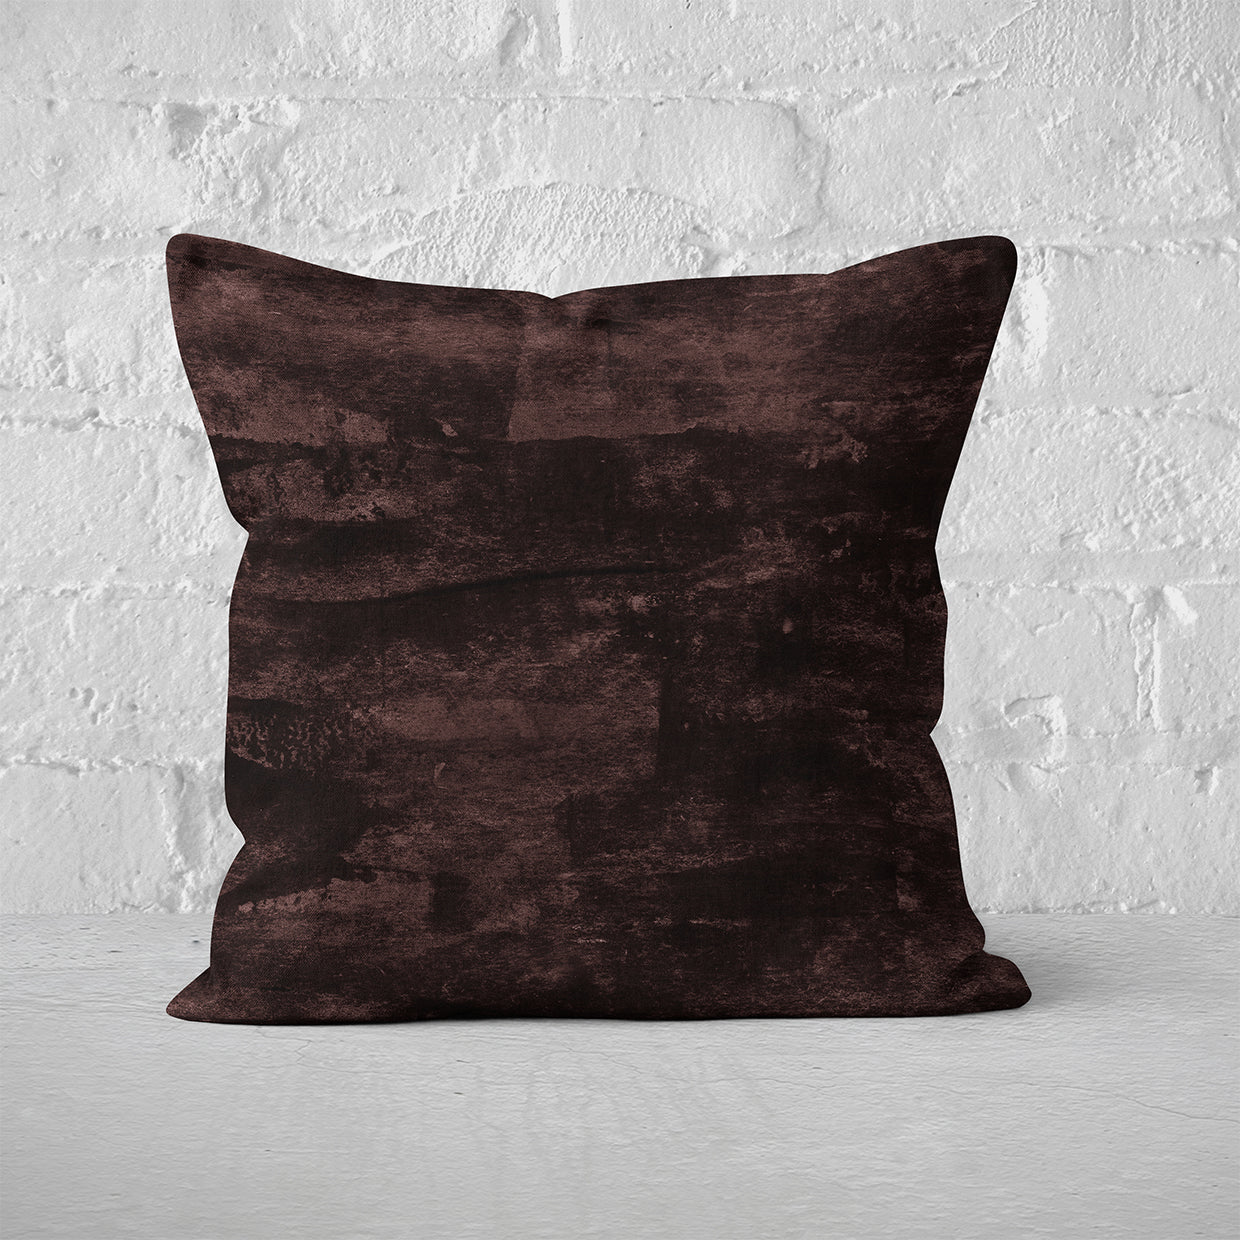 Pillow Cover Art Feature 'Satellite' - Black & Brown - Cotton Twill